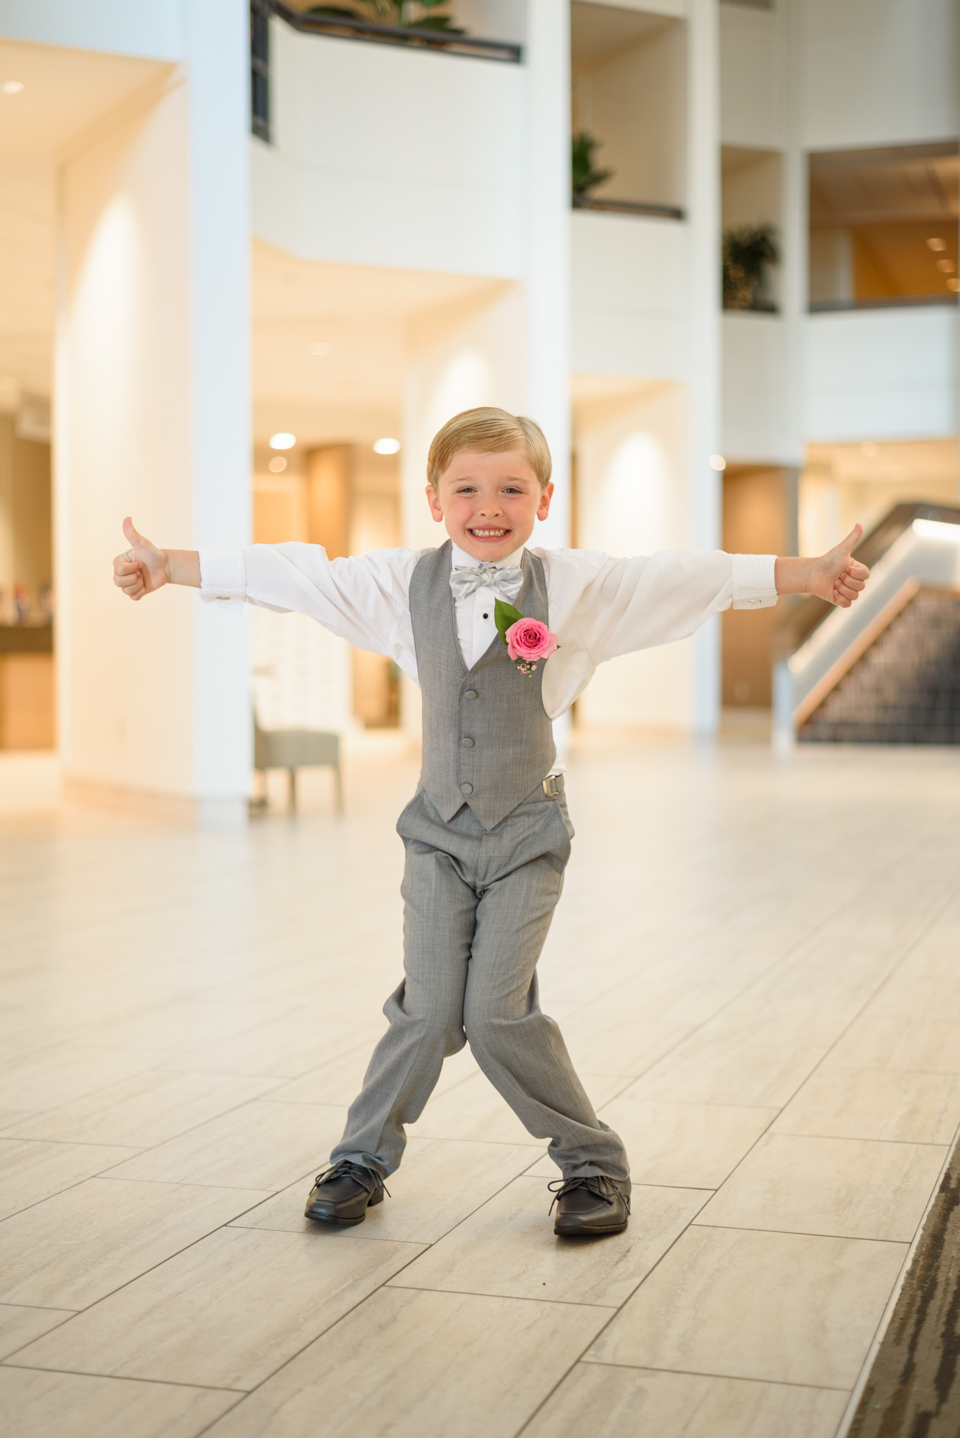 the couple's son jokes in the hotel lobby with thumbs up